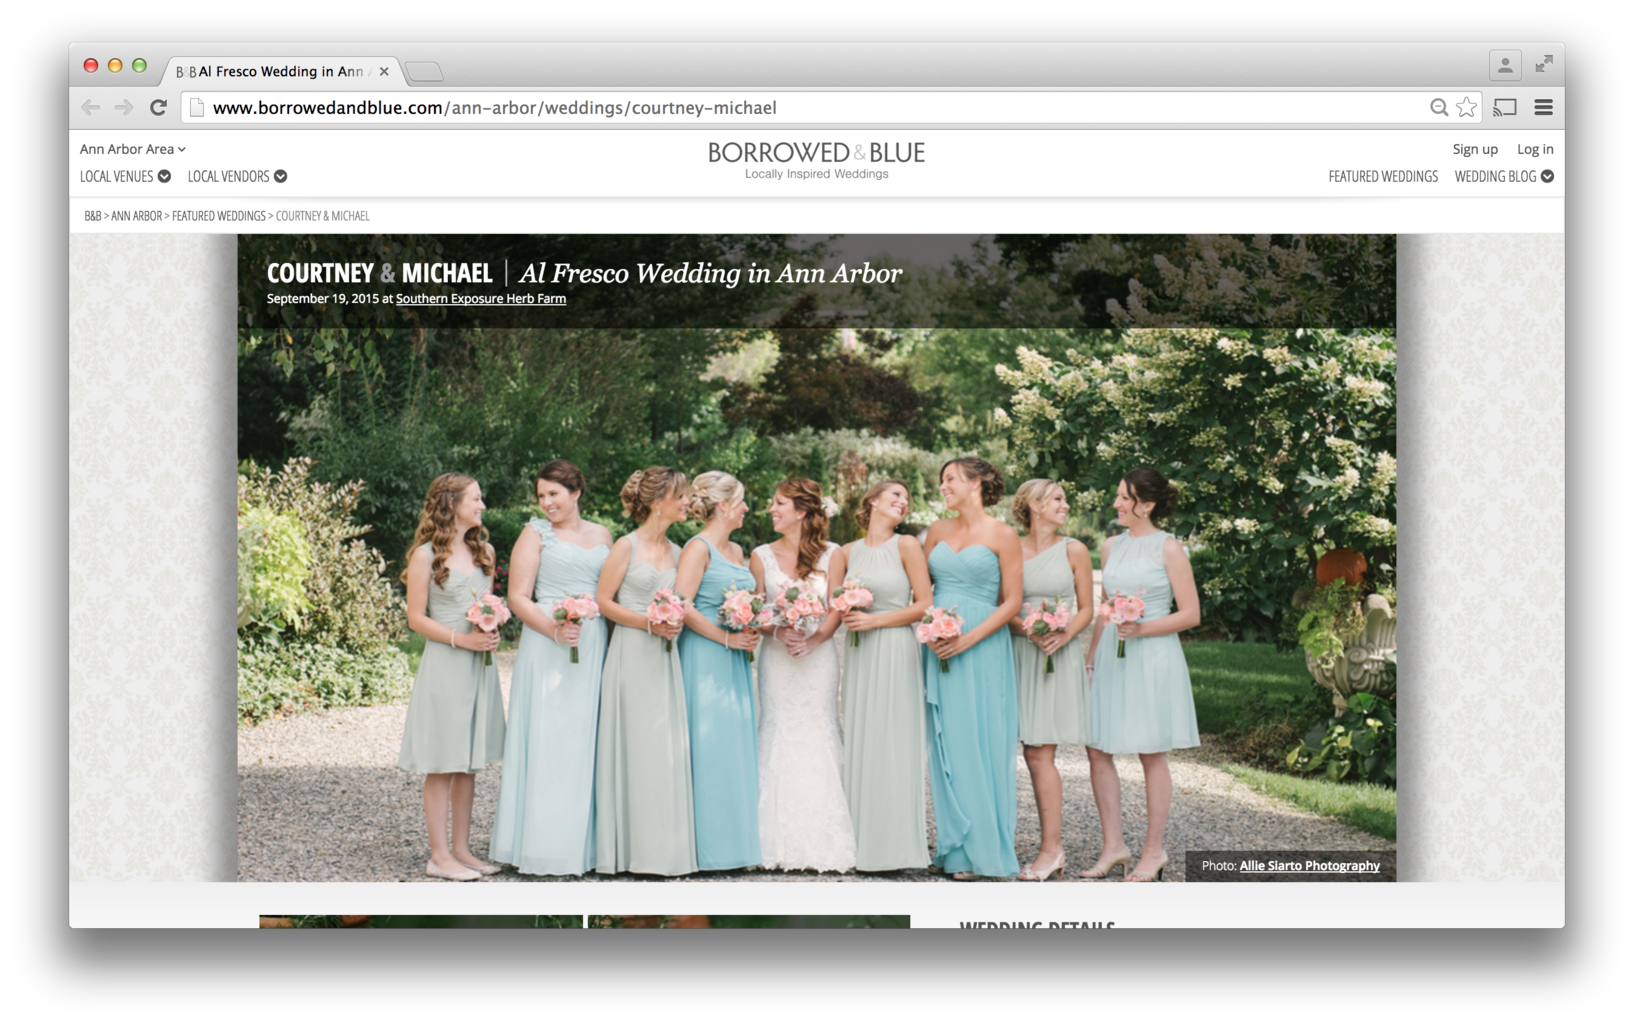 Southern Exposure Herb Farm wedding photos featured on Borrowed and Blue